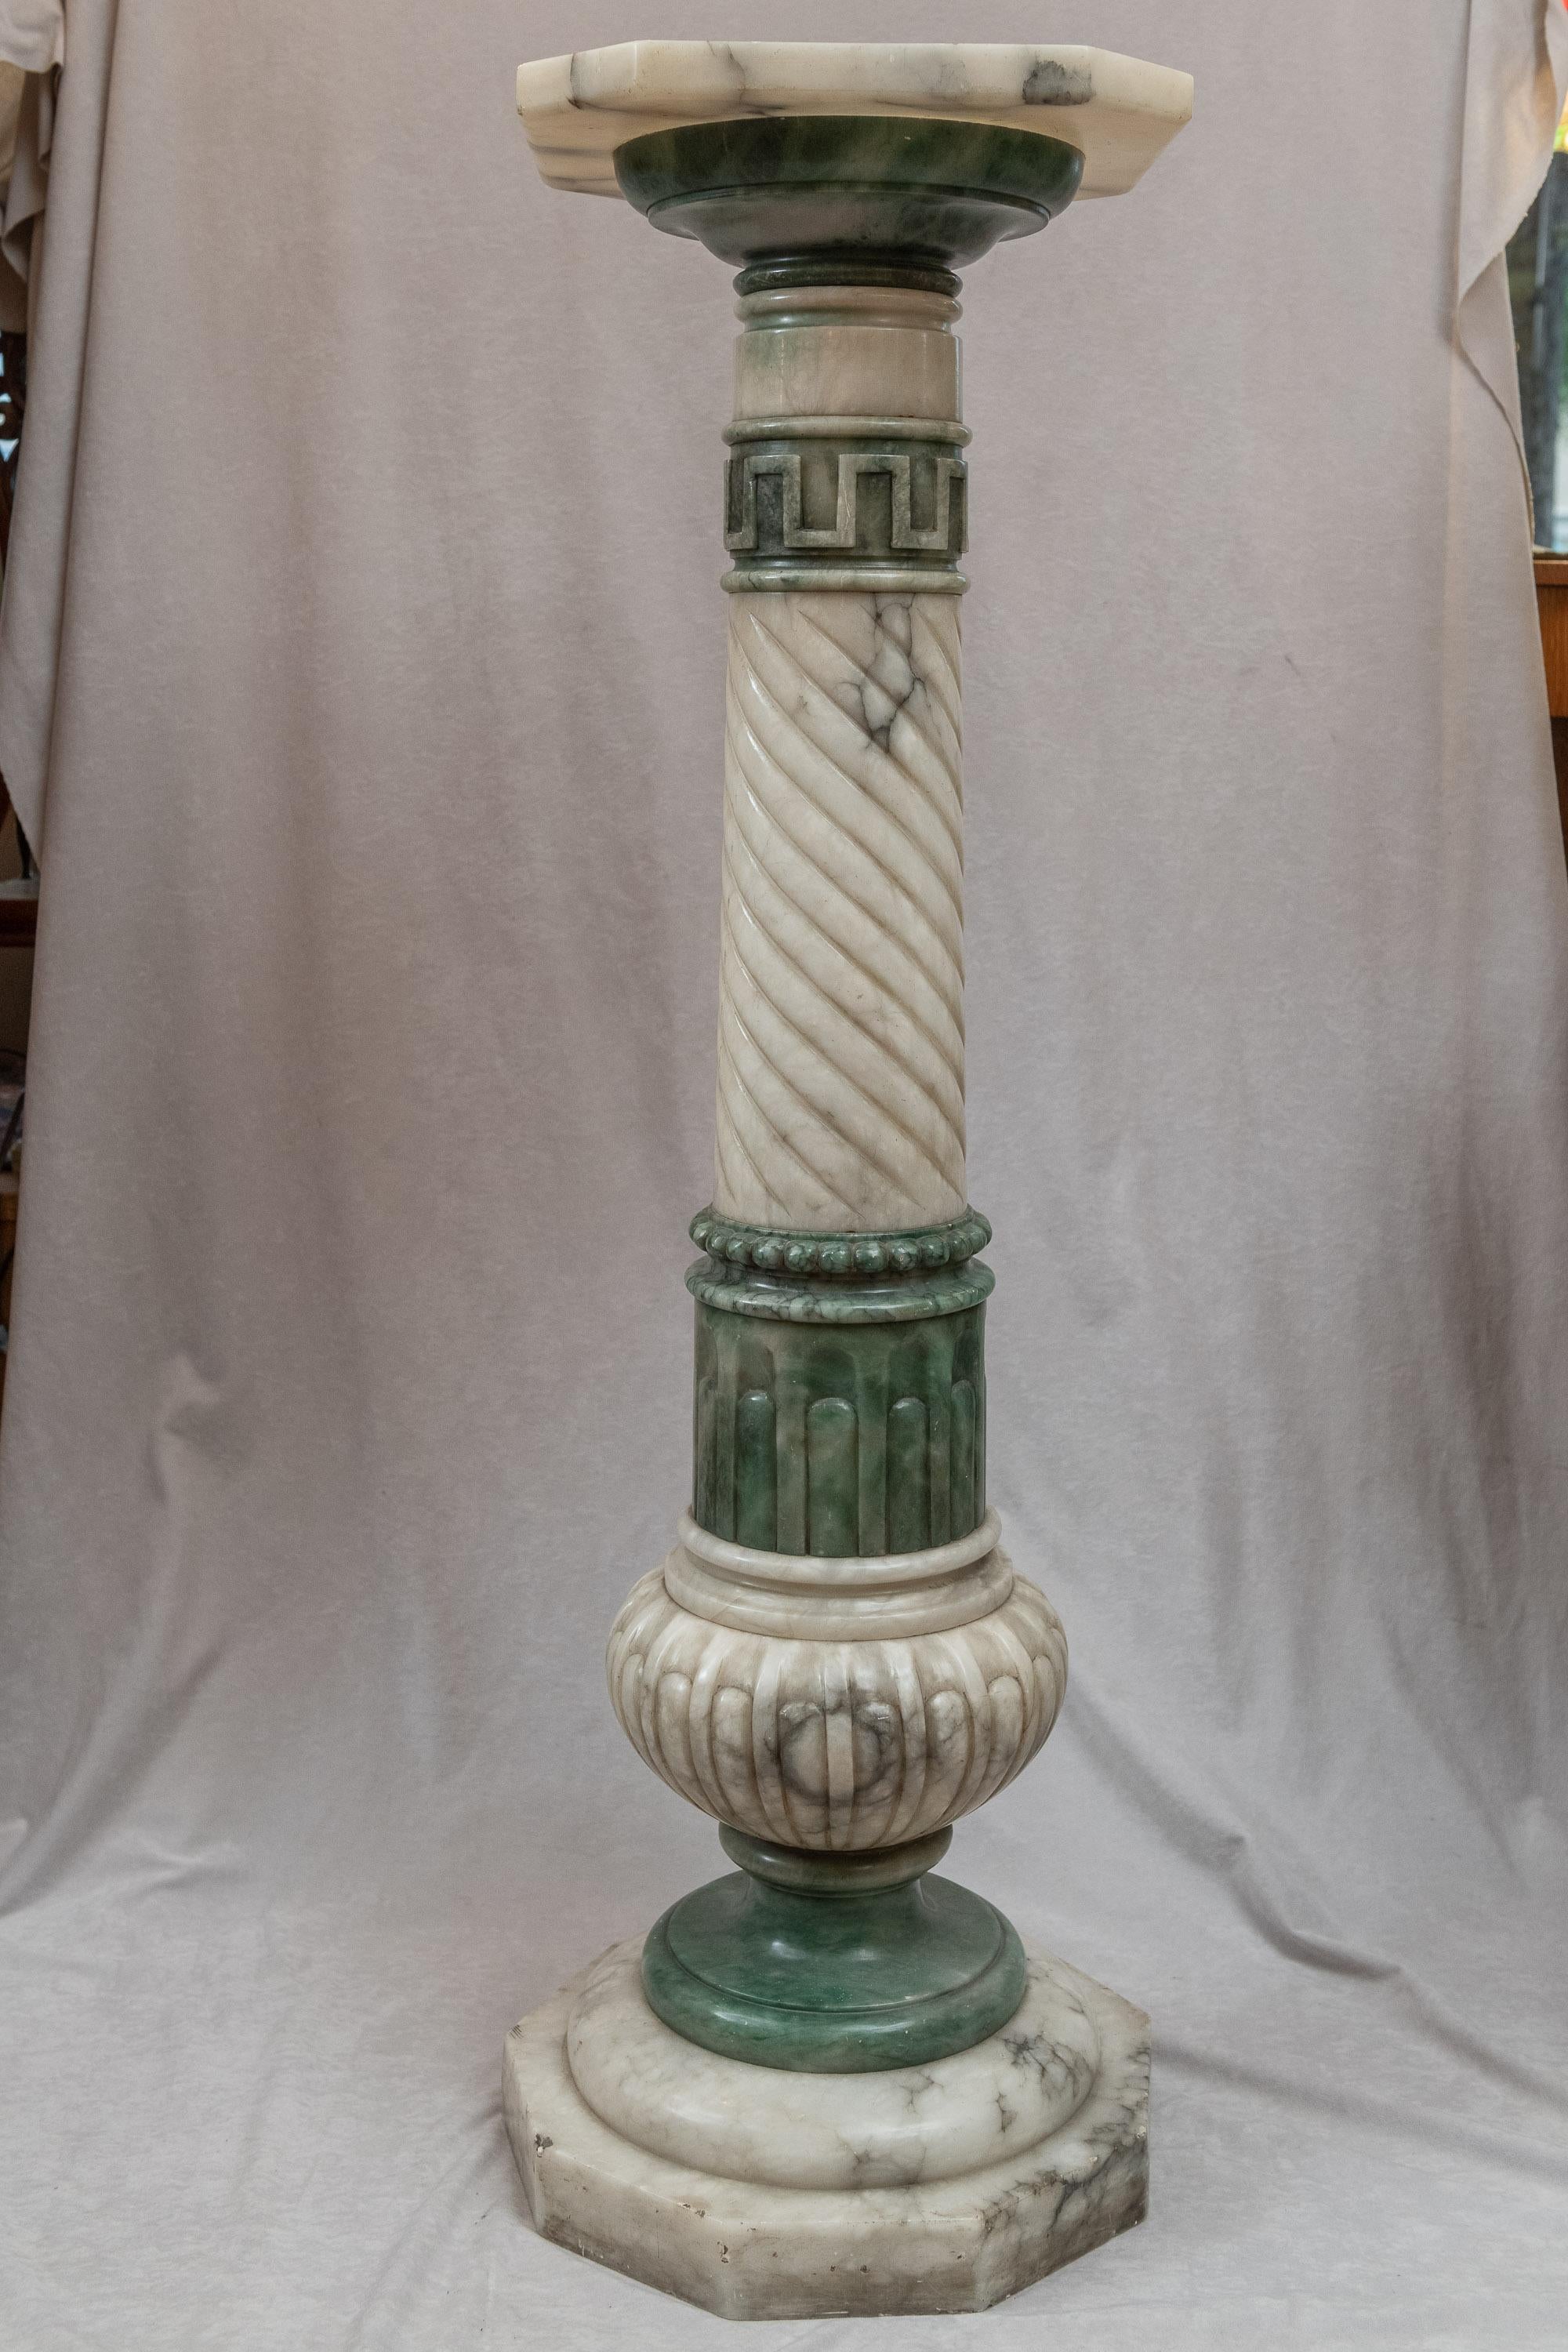 This very unusual and beautiful pedestal has been in our gallery for over 20 years and has not been for sale the whole time. We have always had some of our favorite bronze statues shown upon it. Time marches on and so we are know offering this great